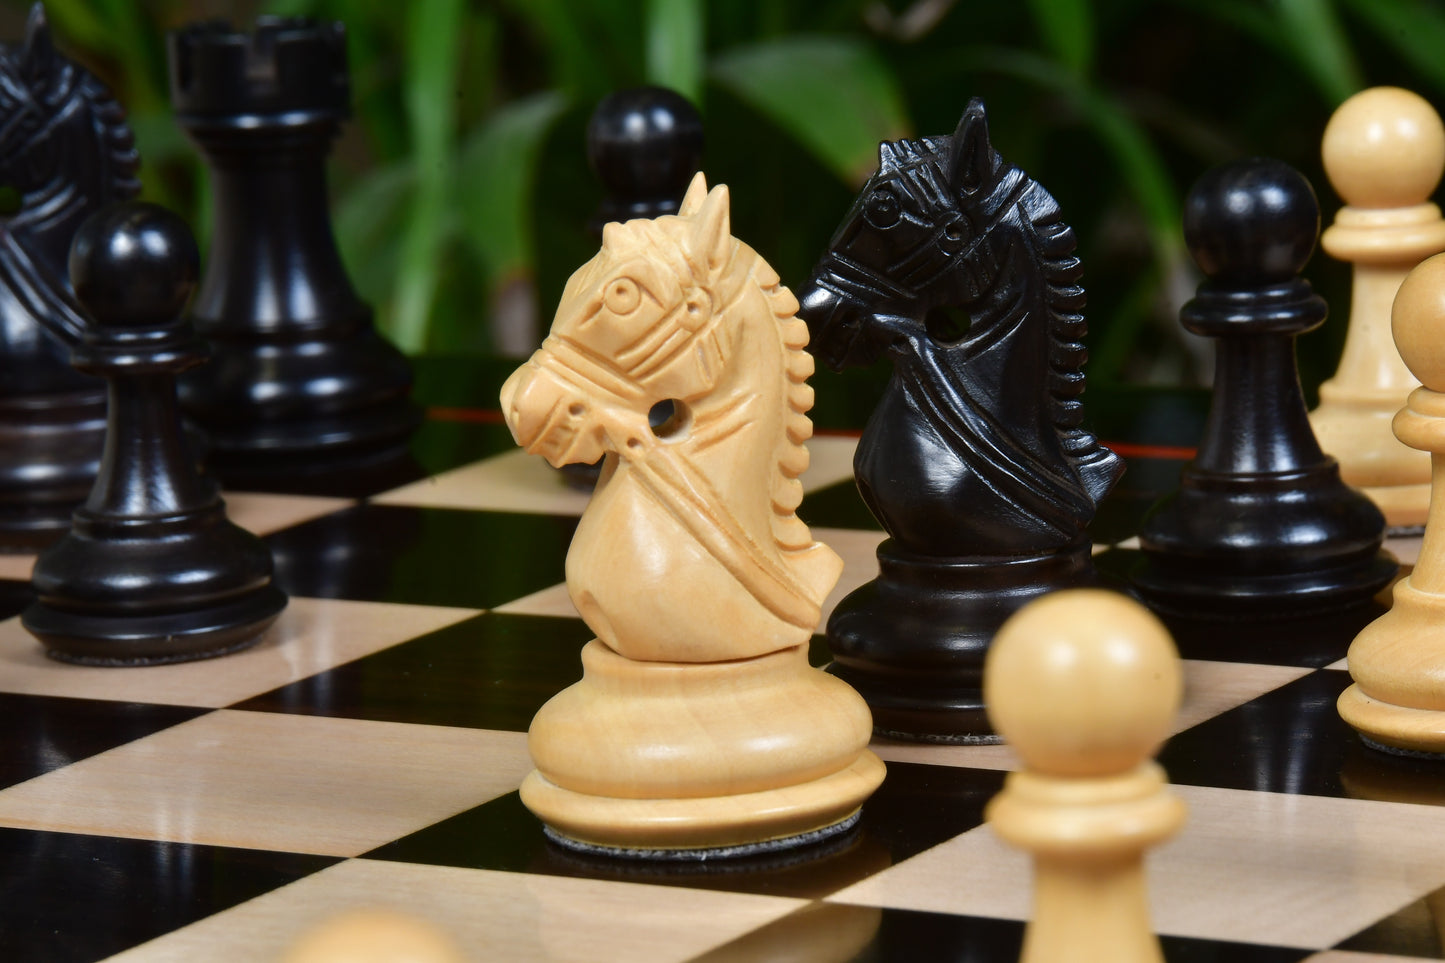 The Bridle Study Analysis Chess Pieces in Ebonized and Boxwood - 3.2" King